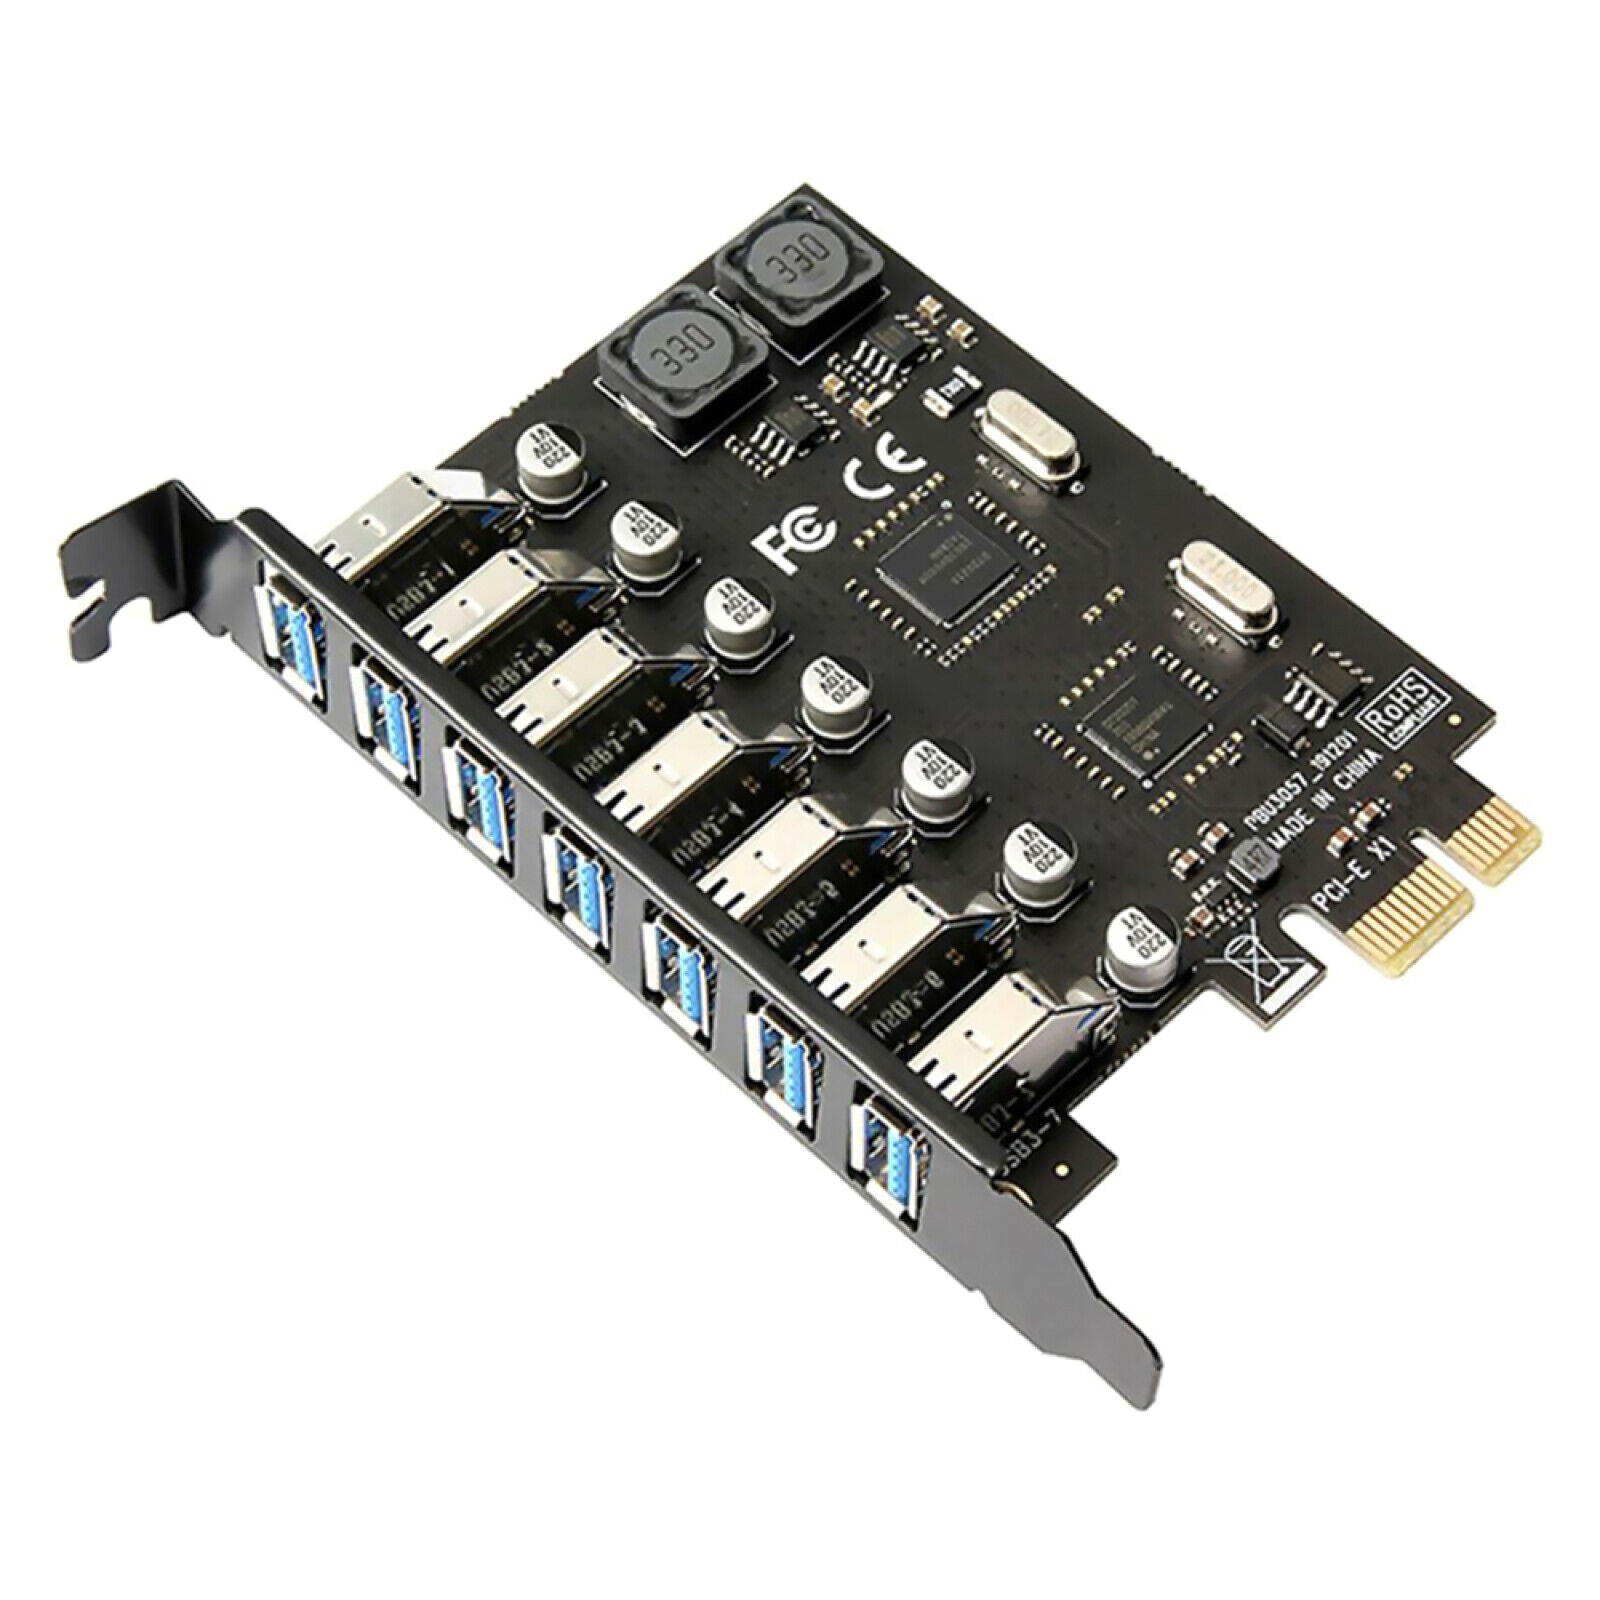 PCB+Metal 5Gbps 7 Port USB3.0 PCI Express Card Expansion Converter Adapter